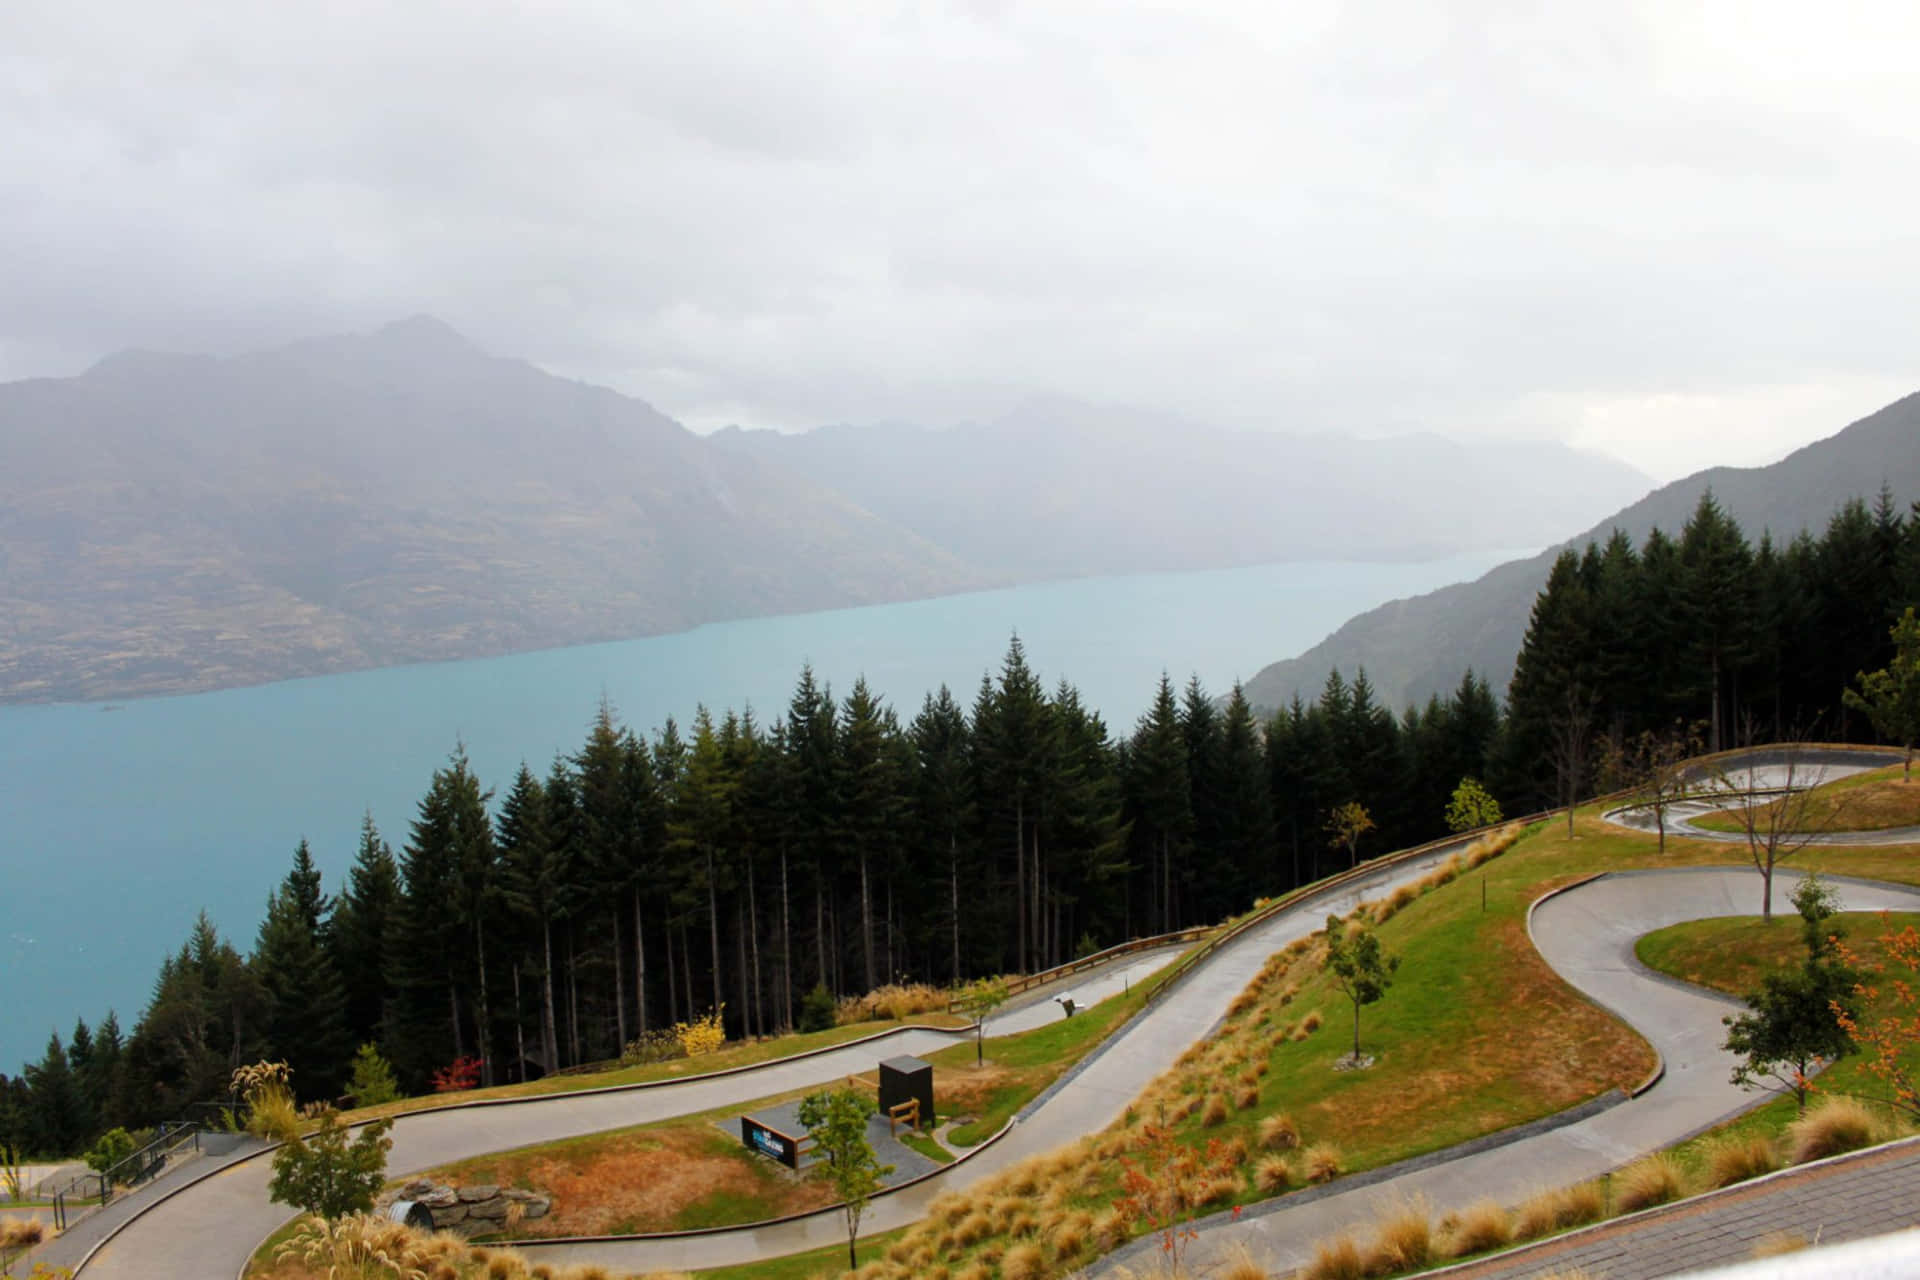 Queenstown Lakeside Scenic View Wallpaper